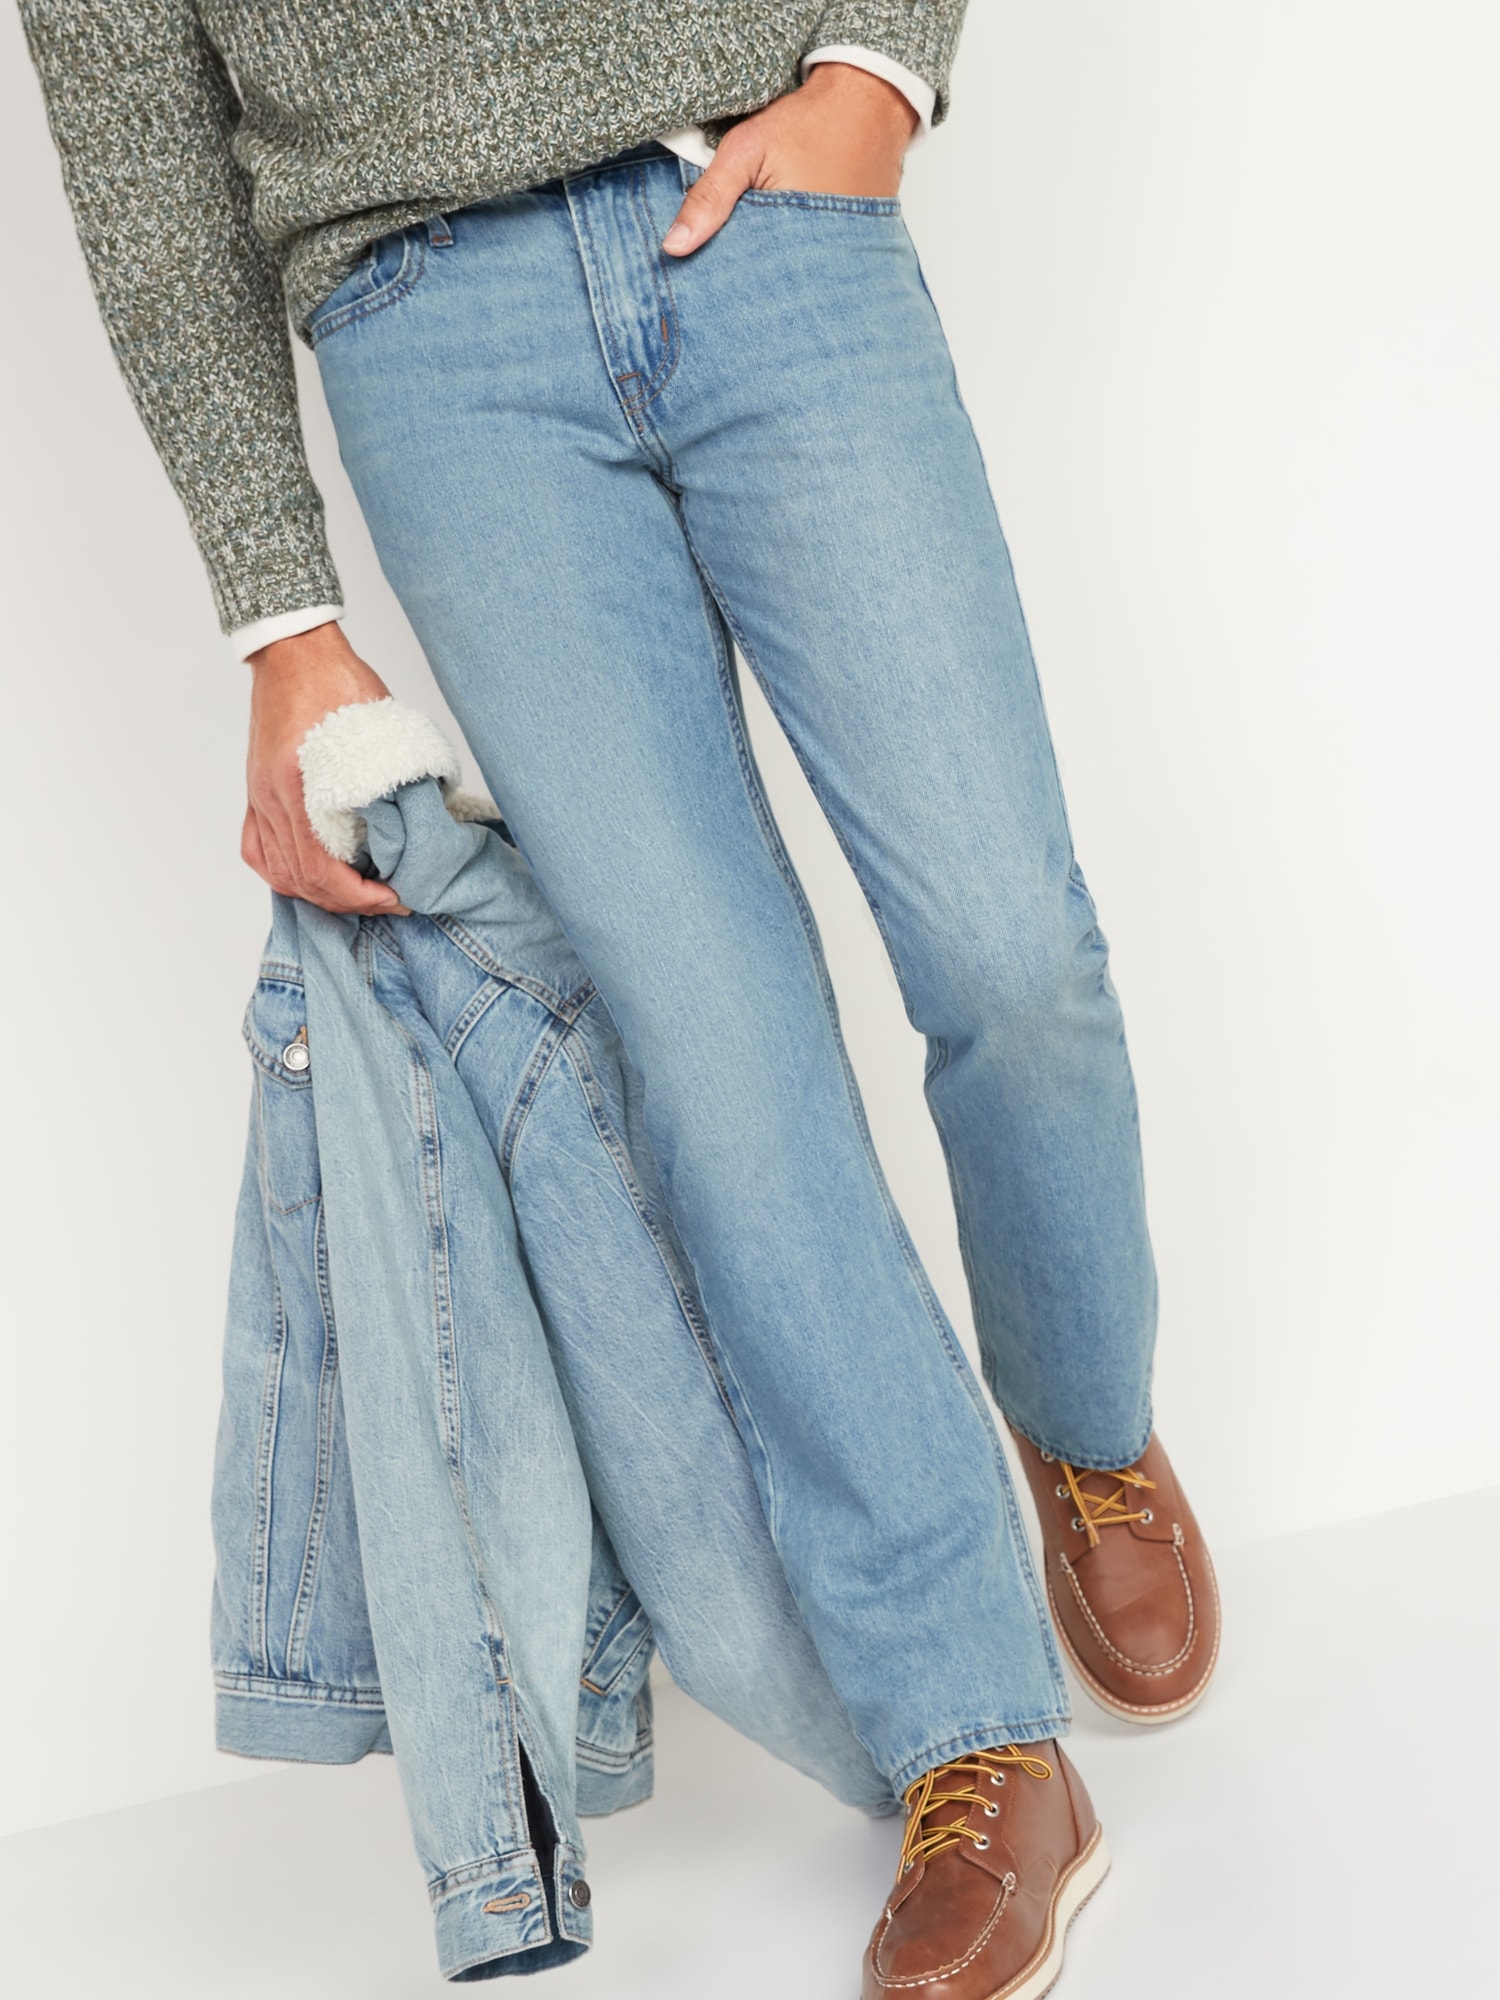 Old Navy: Save 50% on Jeans today